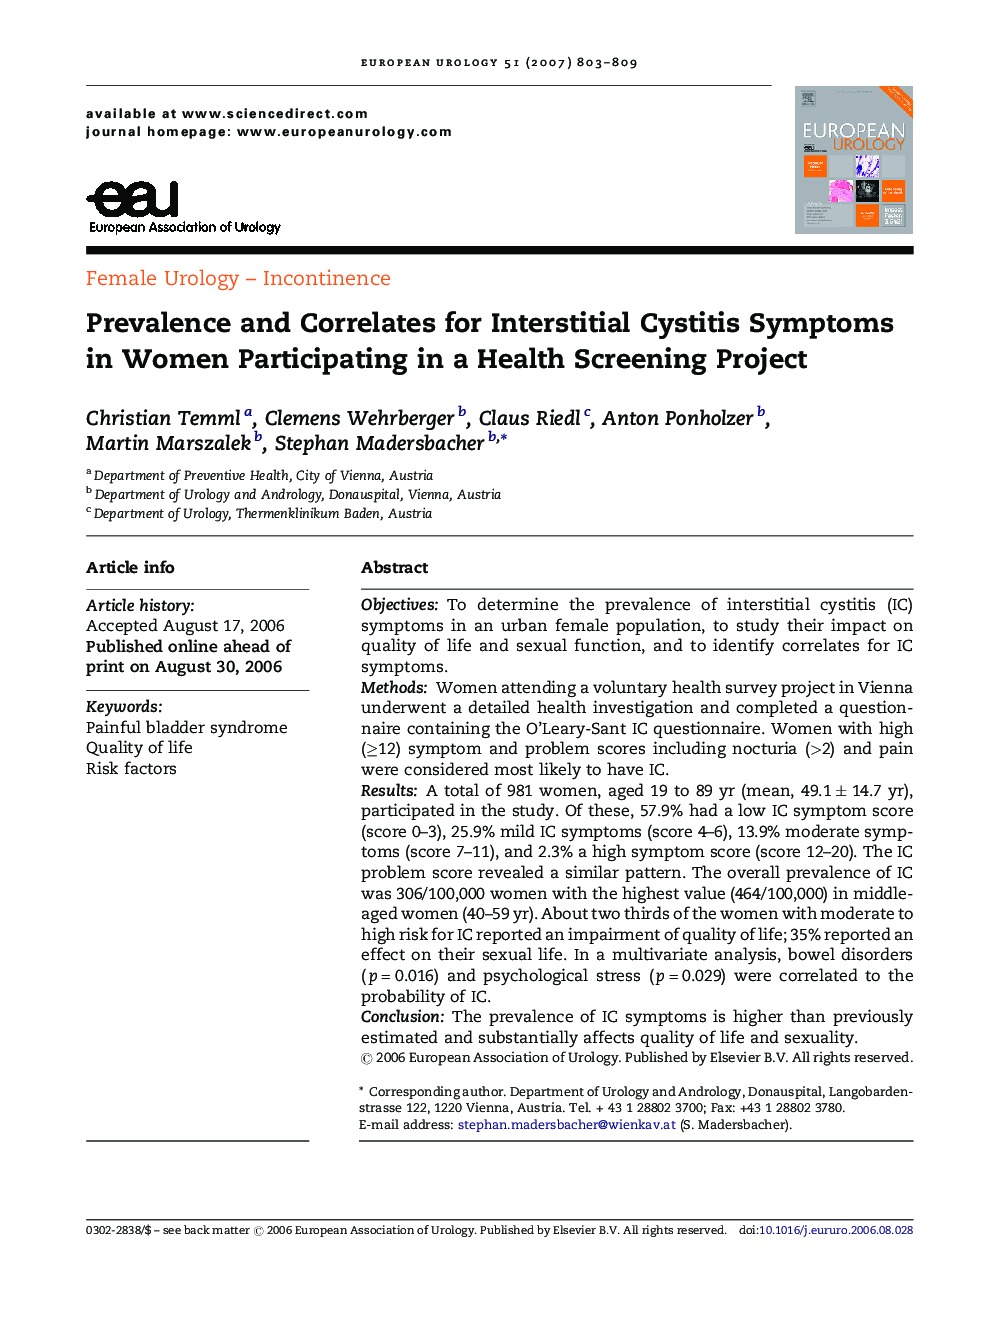 Prevalence and Correlates for Interstitial Cystitis Symptoms in Women Participating in a Health Screening Project